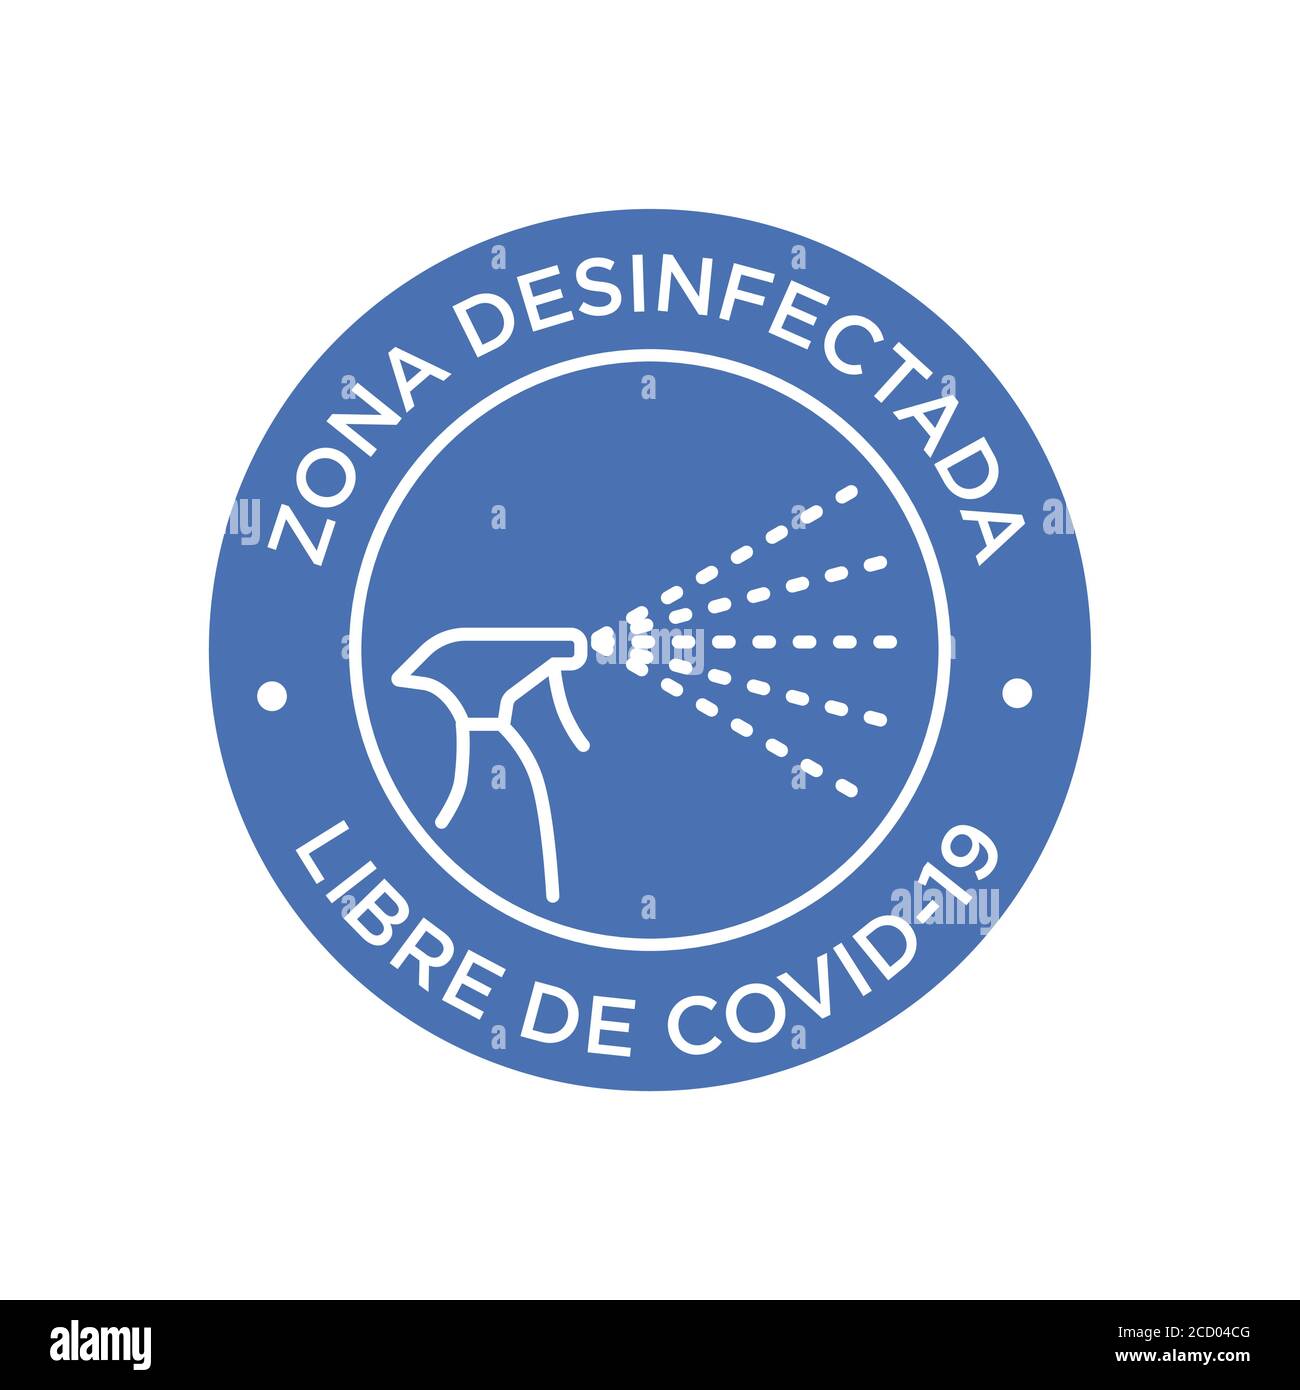 Covid-19 free zone icon written in Spanish. Round symbol for disinfected areas of Coronavirus. Stock Vector